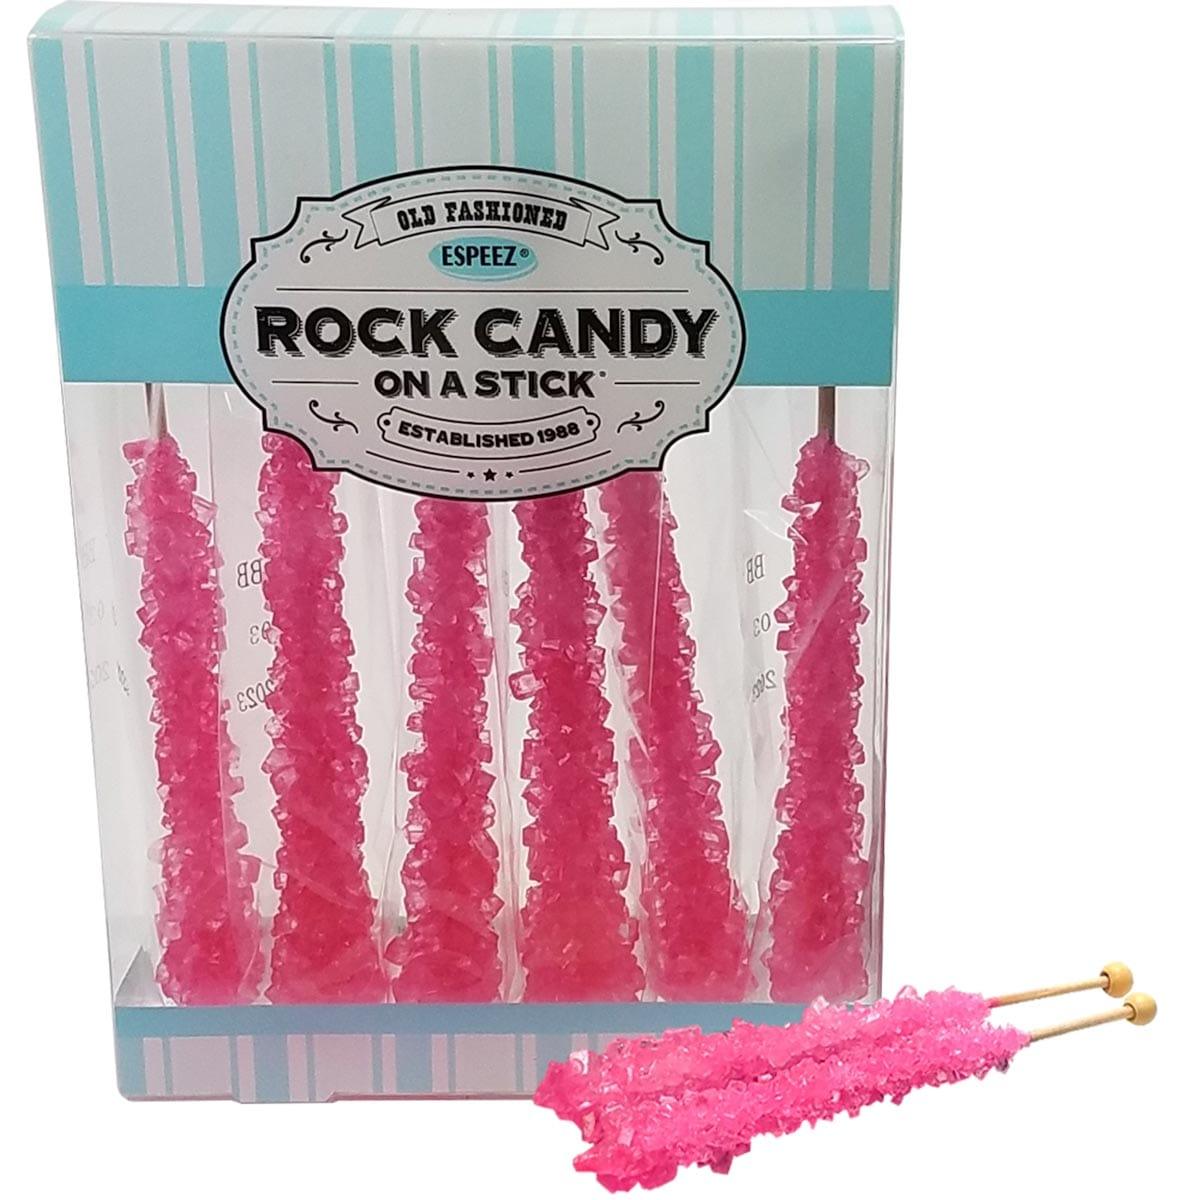 Buy Candy Pink Rock Candy On Stick, 6 Count sold at Party Expert